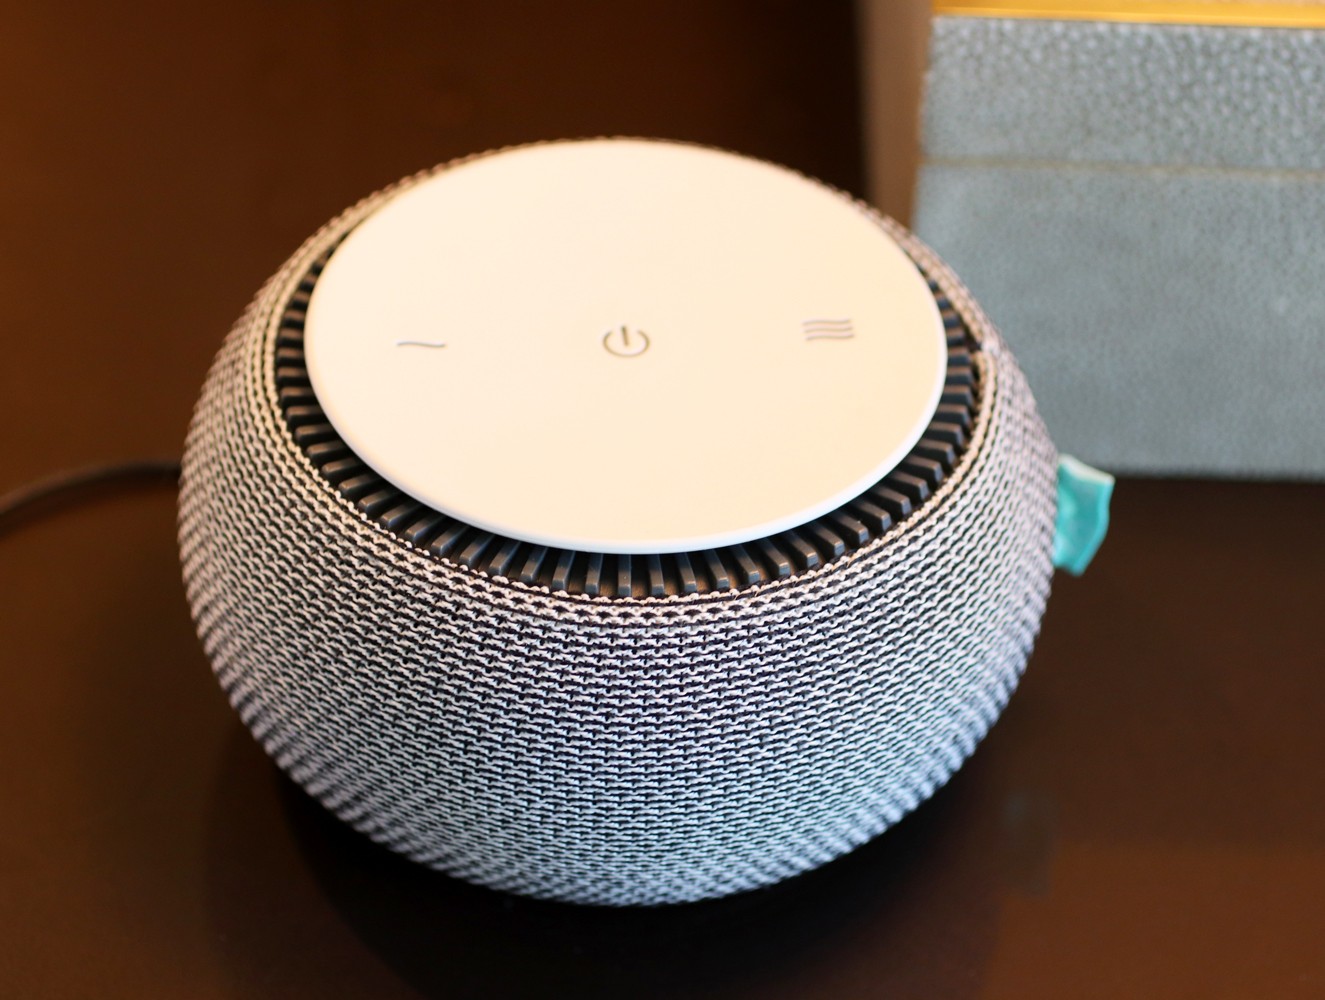 Snooz White Noise Machine Review by popular Los Angeles lifestyle blogger My Beauty Bunny